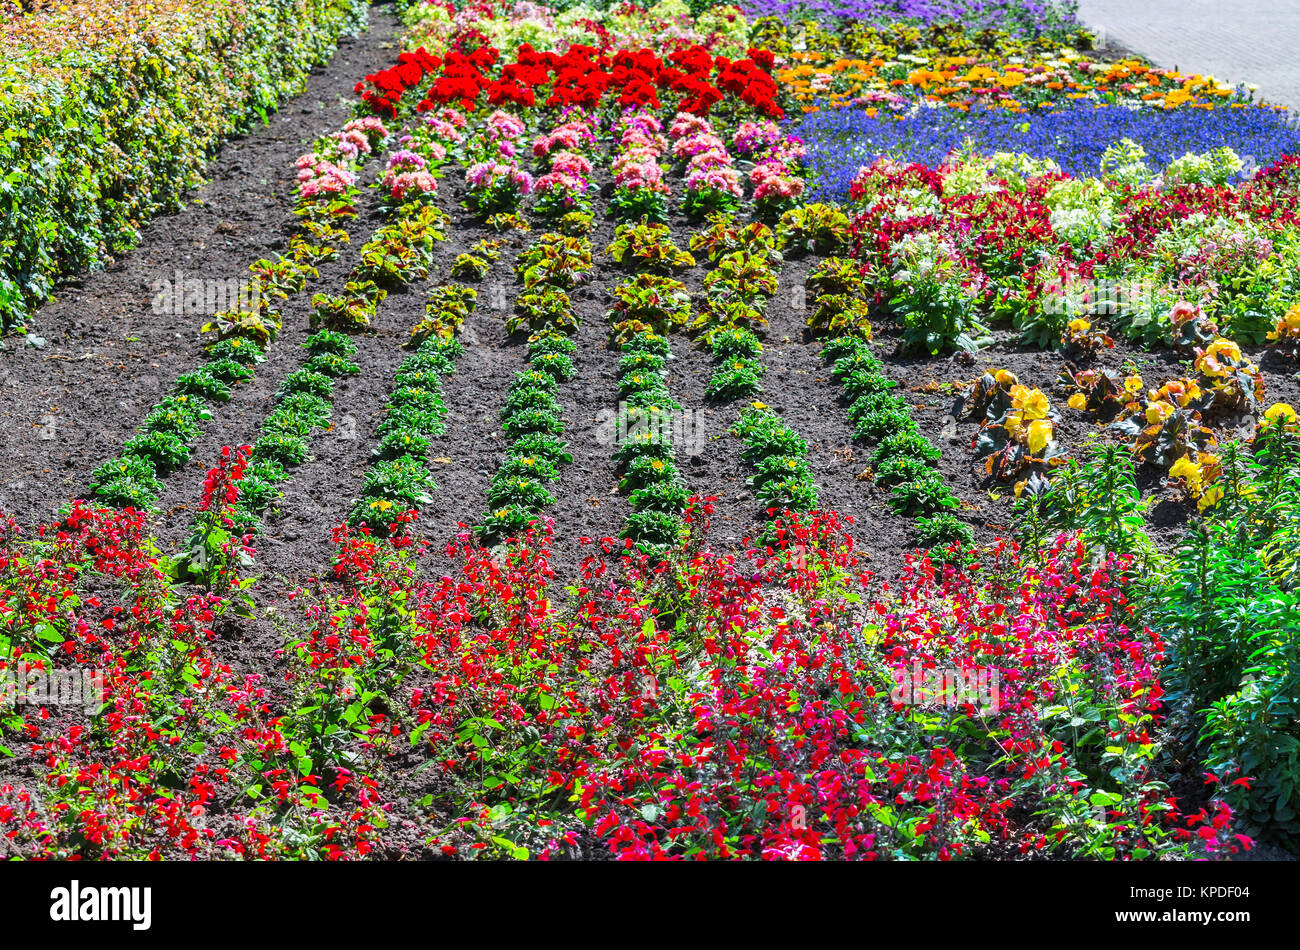 colorful colorful flowerbed Stock Photo - Alamy